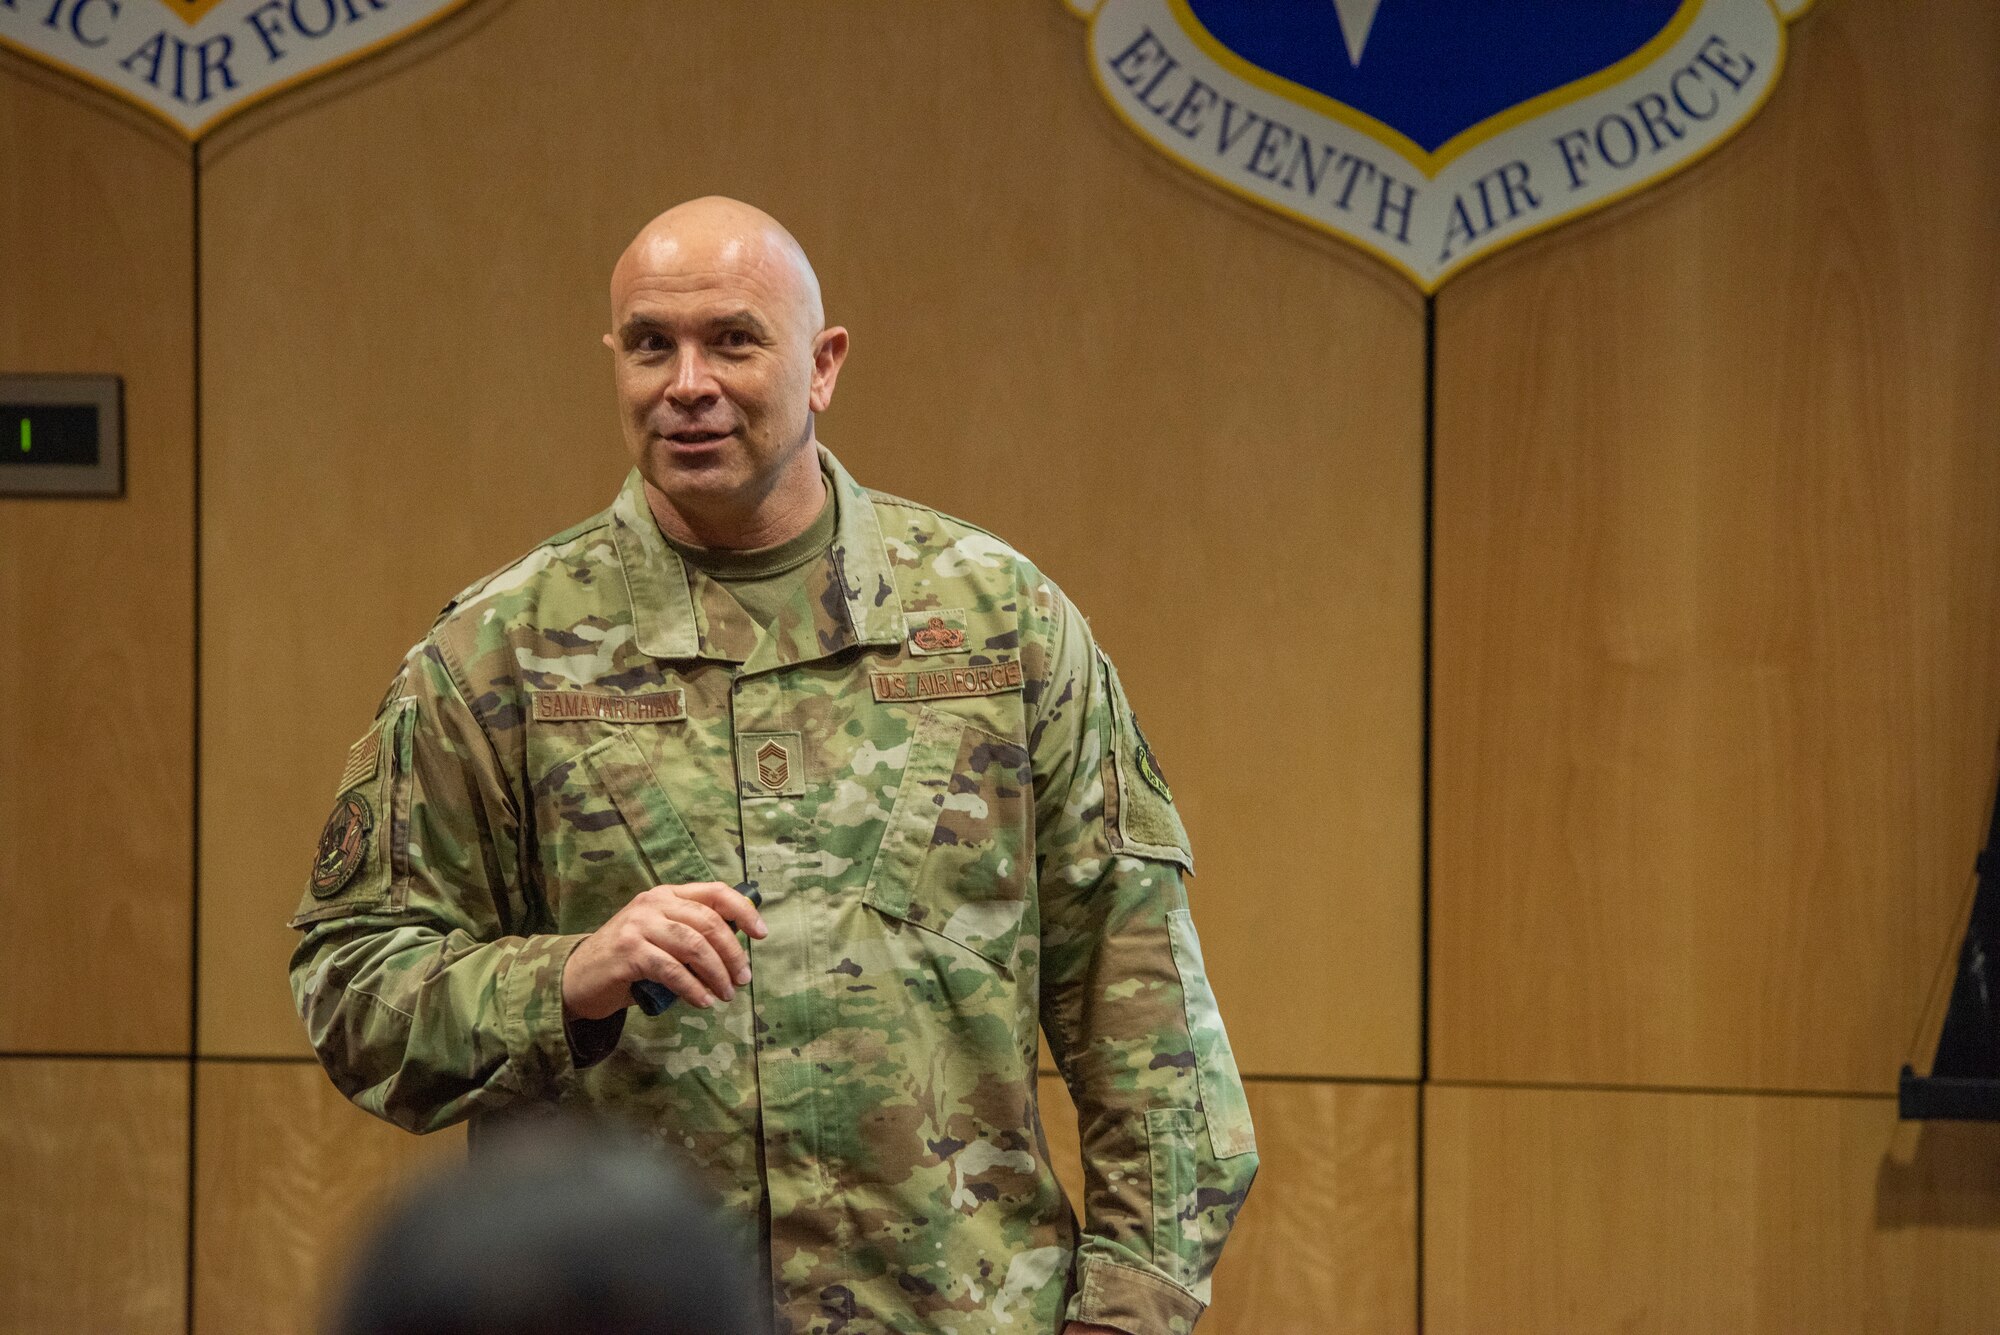 U.S. Air Force Chief Master Sgt. Jalil Samavarchian, Chief of Headquarters Air Force Enlisted Force Development, briefs Airmen and officers during an enlisted force development panel at Joint Base Elmendorf-Richarson, Alaska, March 30, 2023.